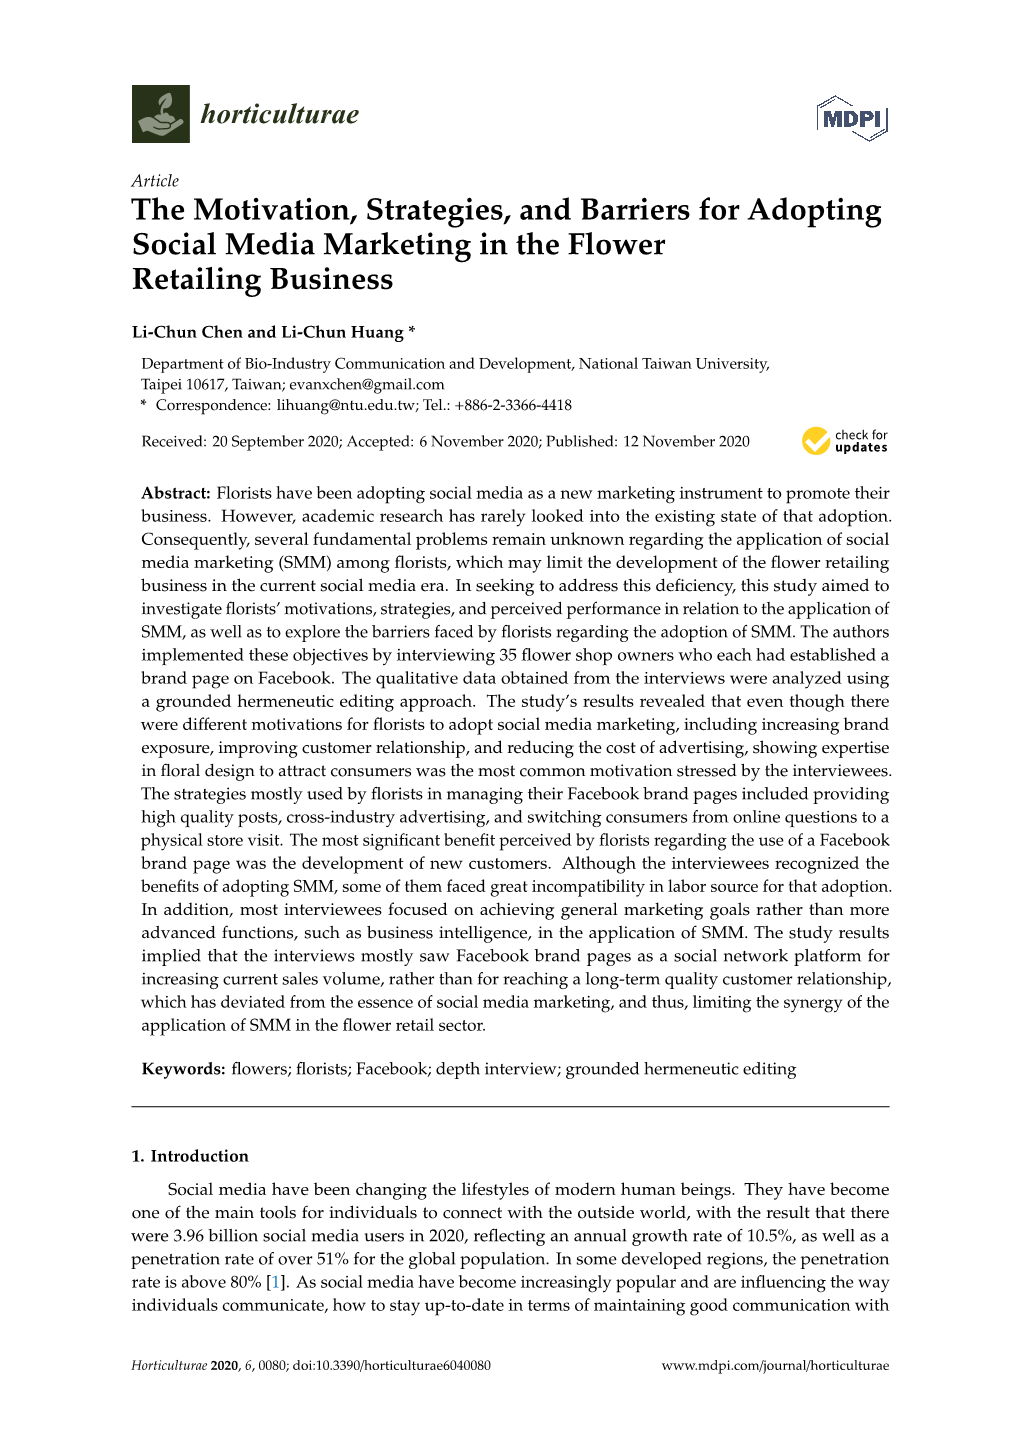 The Motivation, Strategies, and Barriers for Adopting Social Media Marketing in the Flower Retailing Business